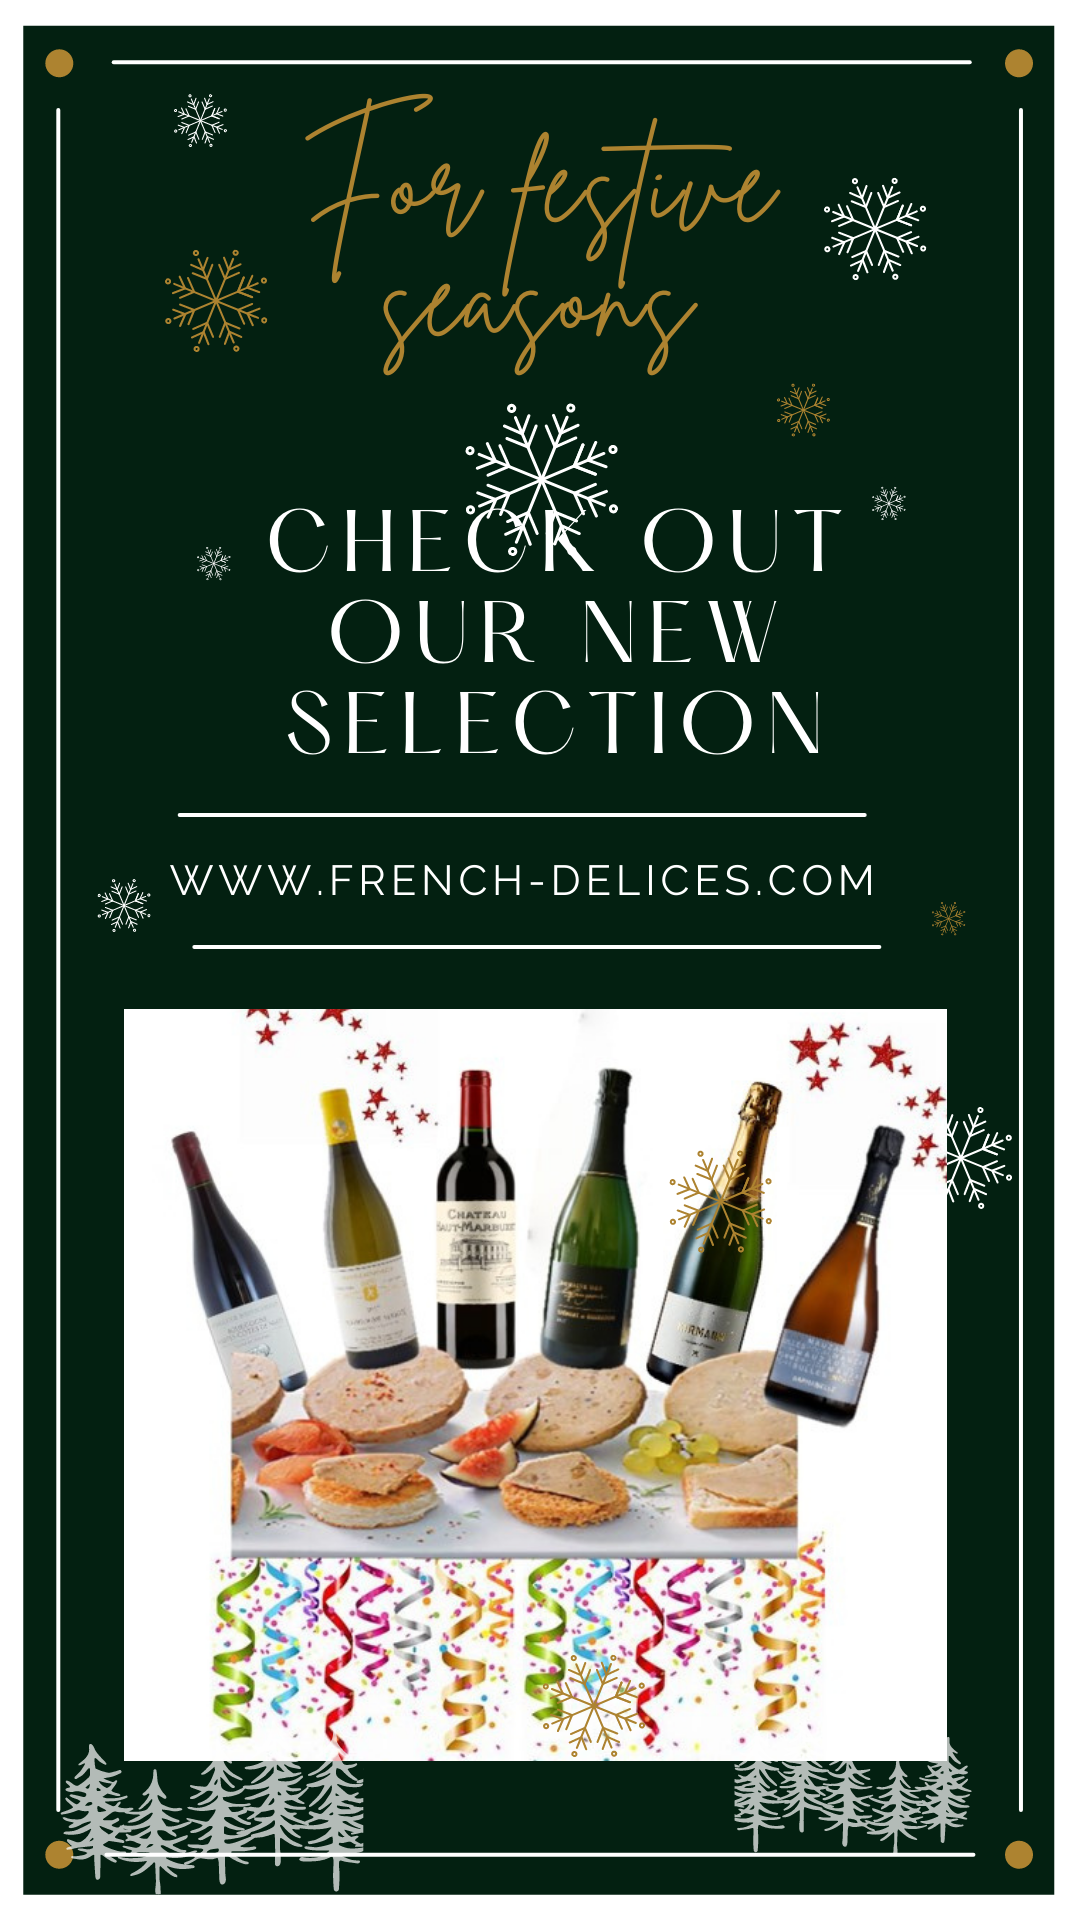 Festive selection at French delices